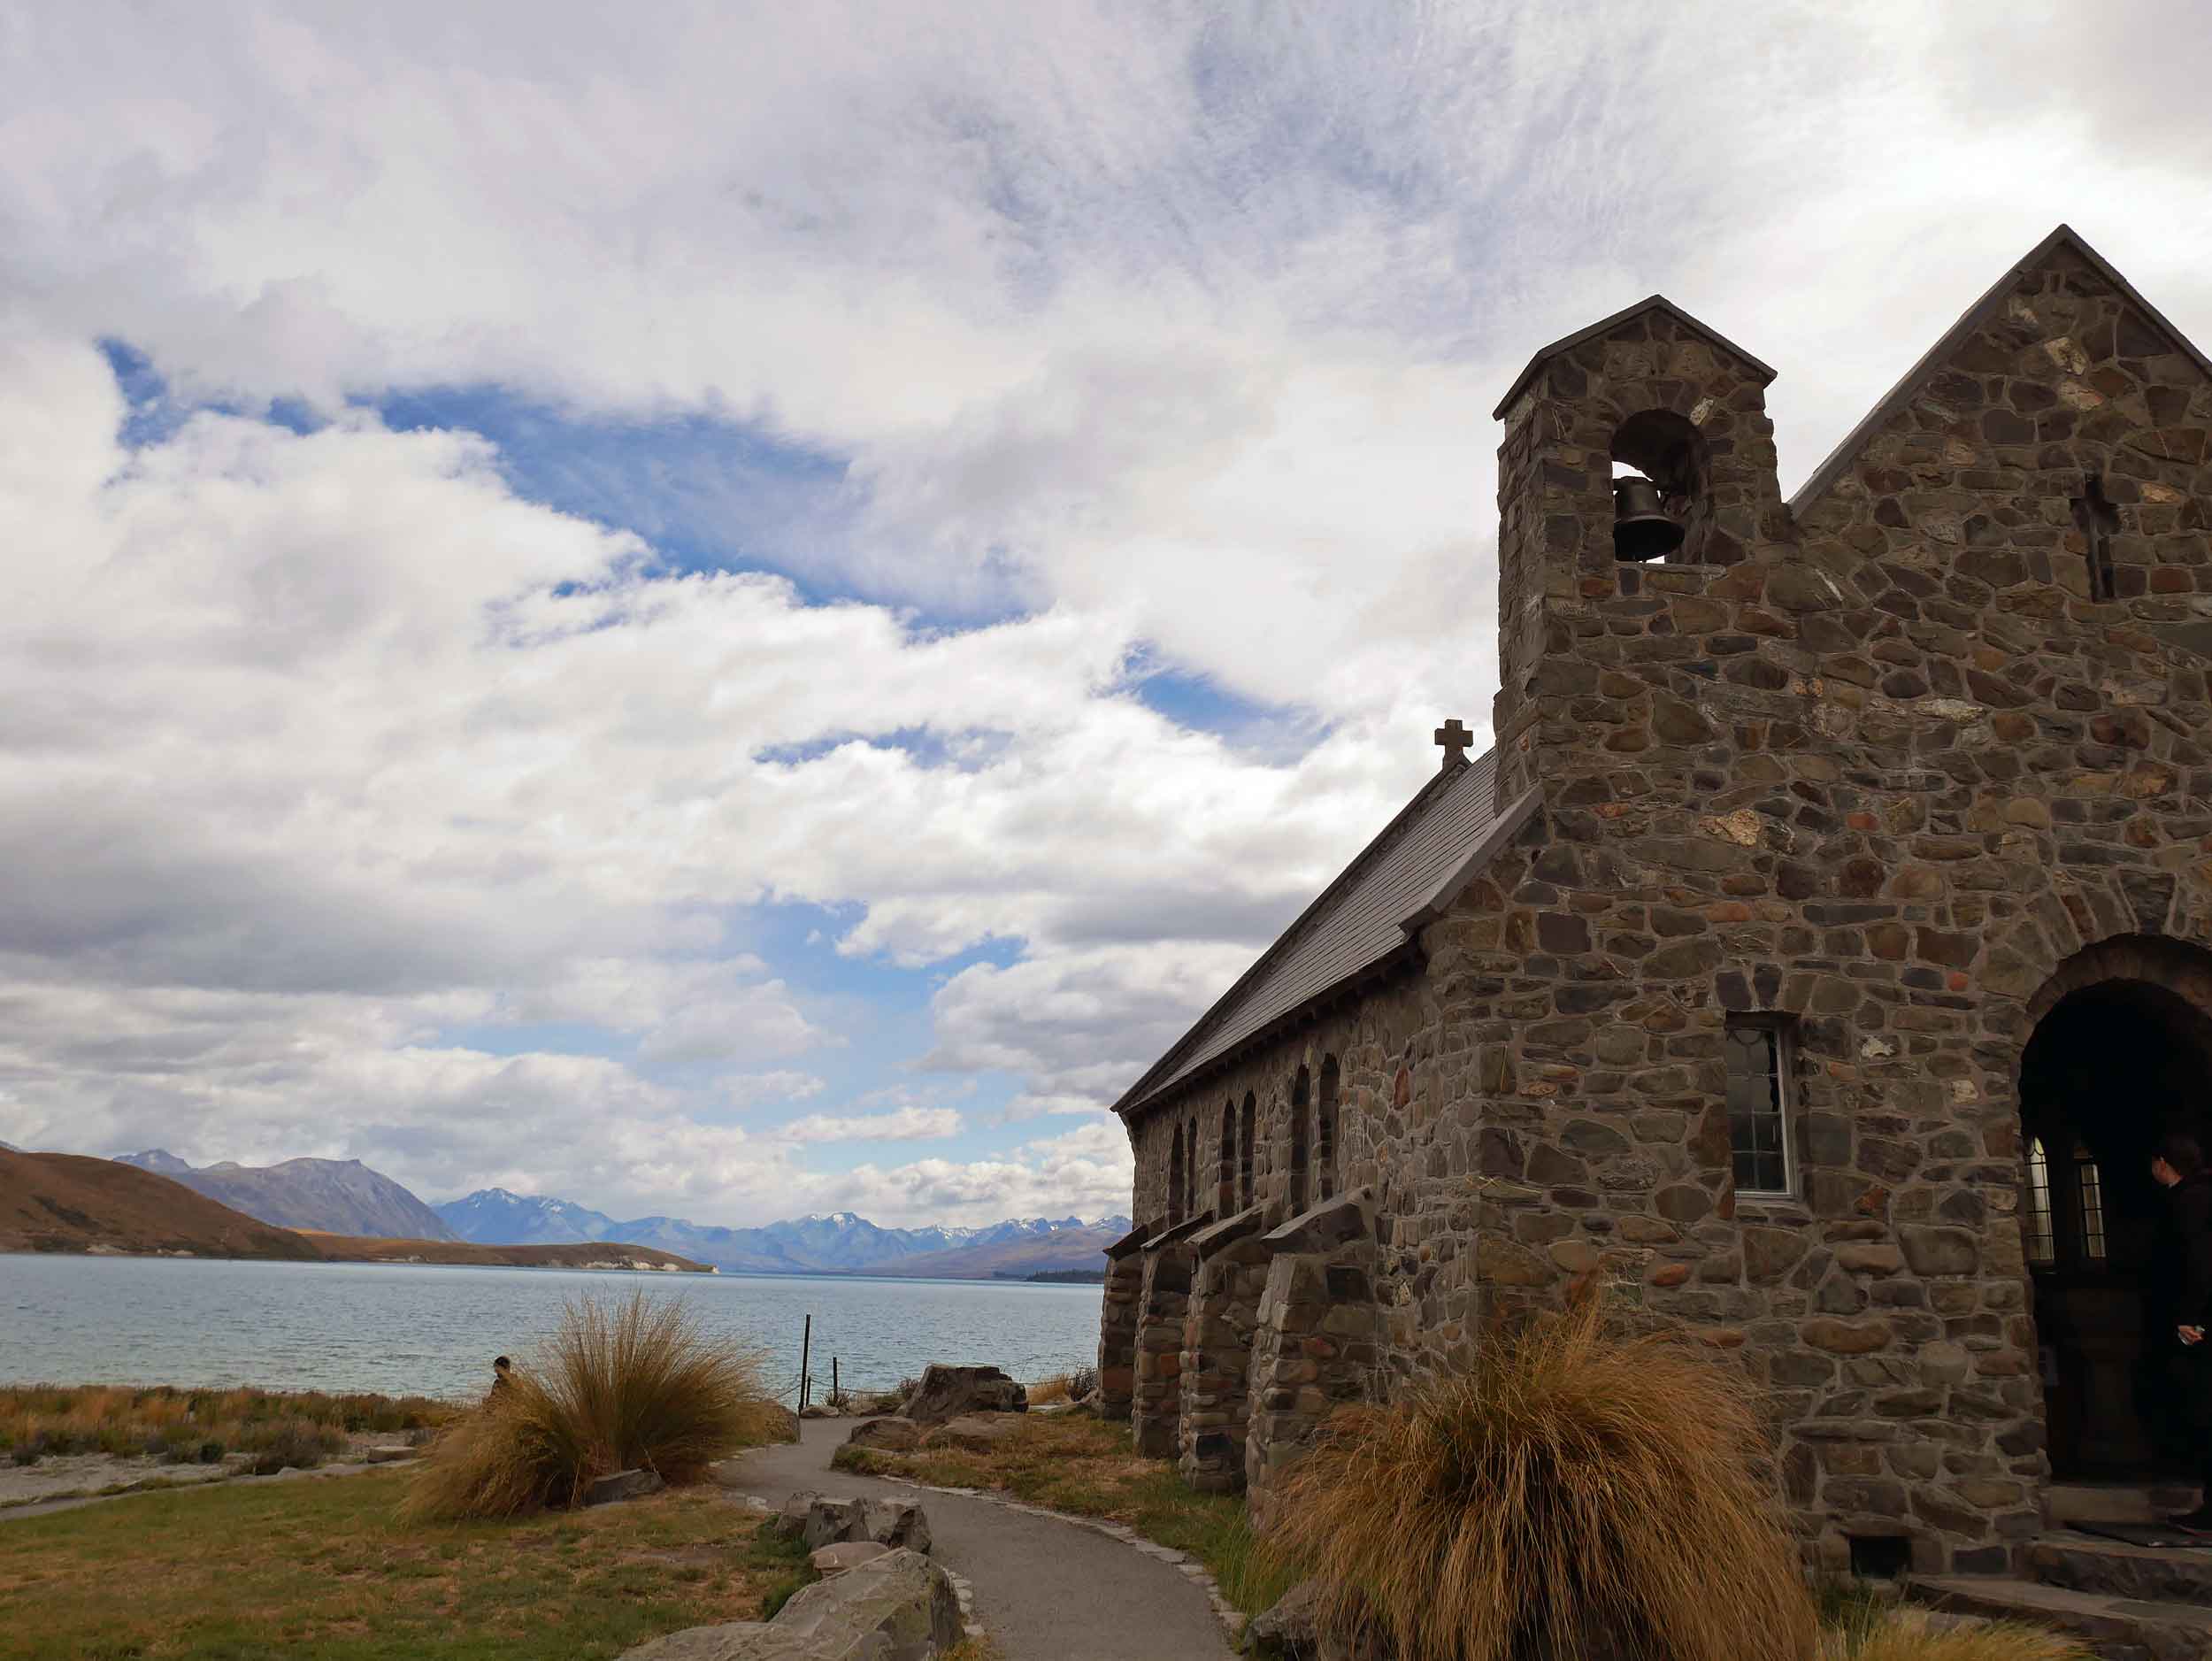  The Church of the Good Shepherd, completed in 1935, sits on the edge of Lake Tekapo and still holds regular services with stunning views of the mountains and lake from the picture window behind the alter (Jan 11).&nbsp; 